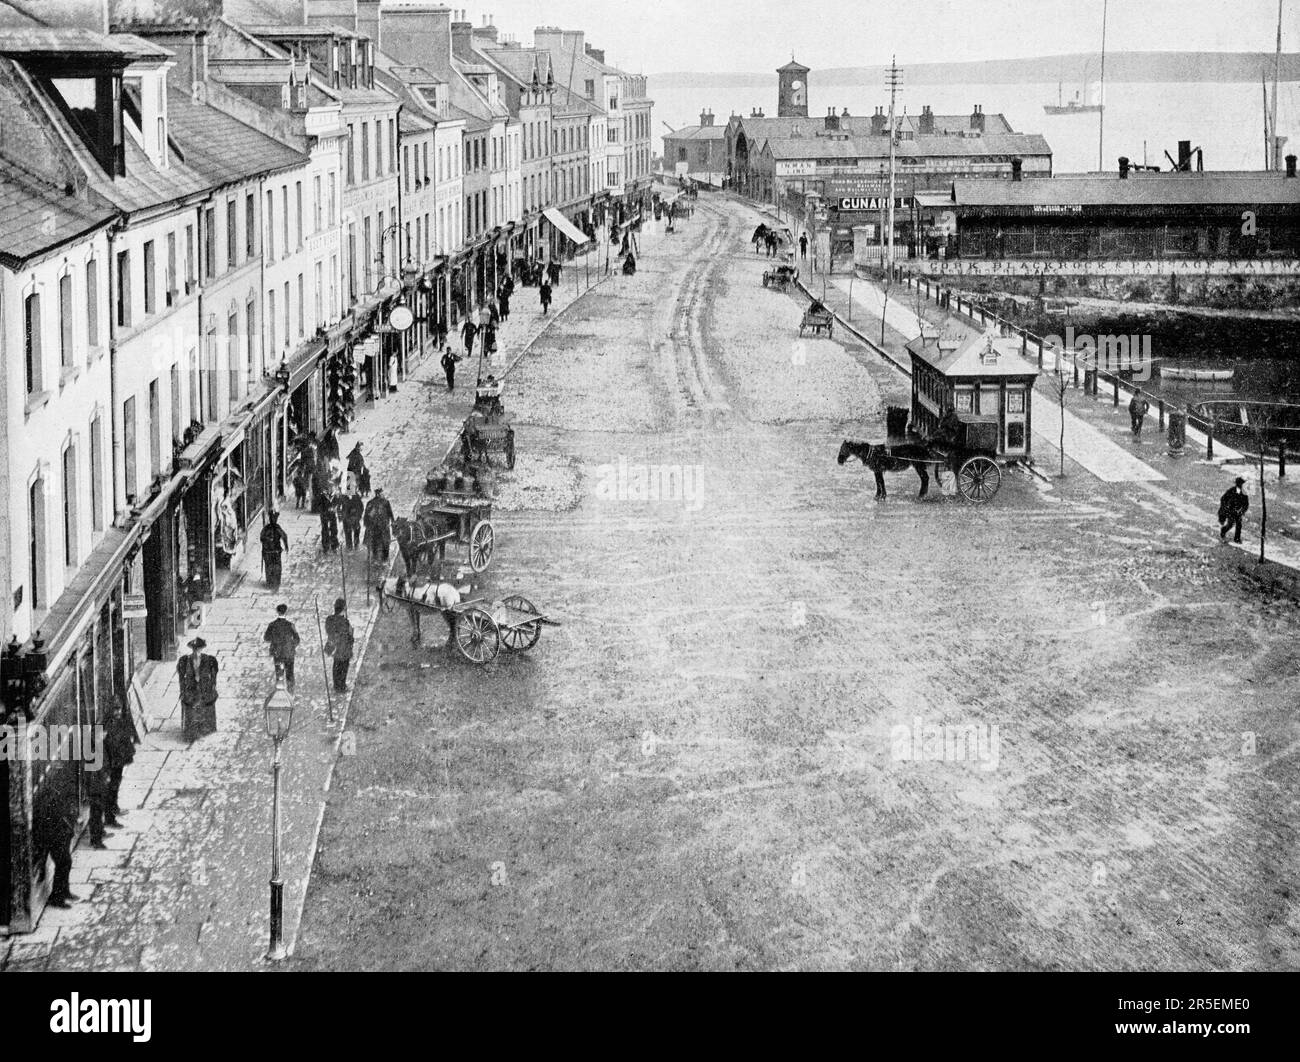 A late 19th century view of the High Road, a shop lined street and waterfront in Cobh, known from 1849 until 1920 as Queenstown, a seaport on the south side of Great Island in Cork Harbour in County Cork, Ireland. A long dedicated cruise terminal, Cobh was the departure point for 2.5 million of the six million Irish people who emigrated to North America between 1848 and 1950. Stock Photo